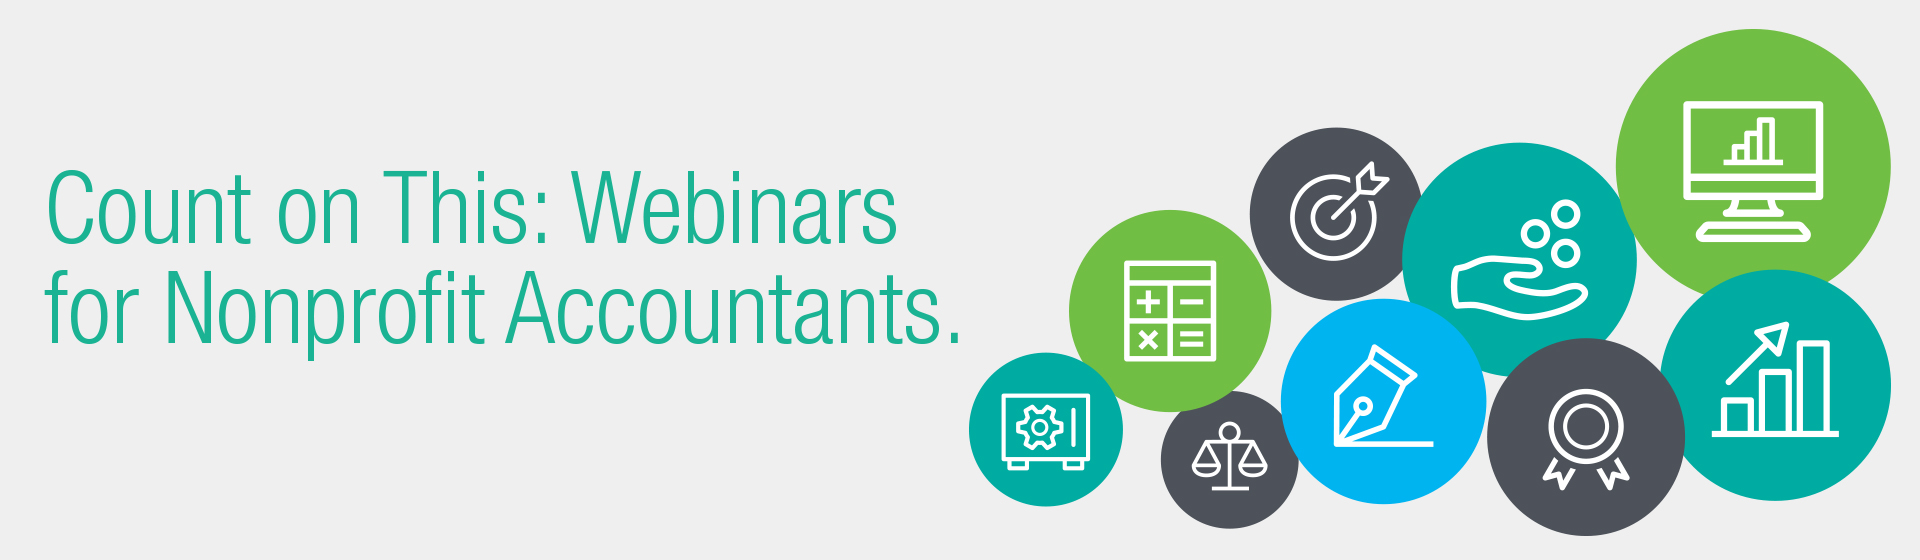 Count on This: Webinars for Nonprofit Accountants